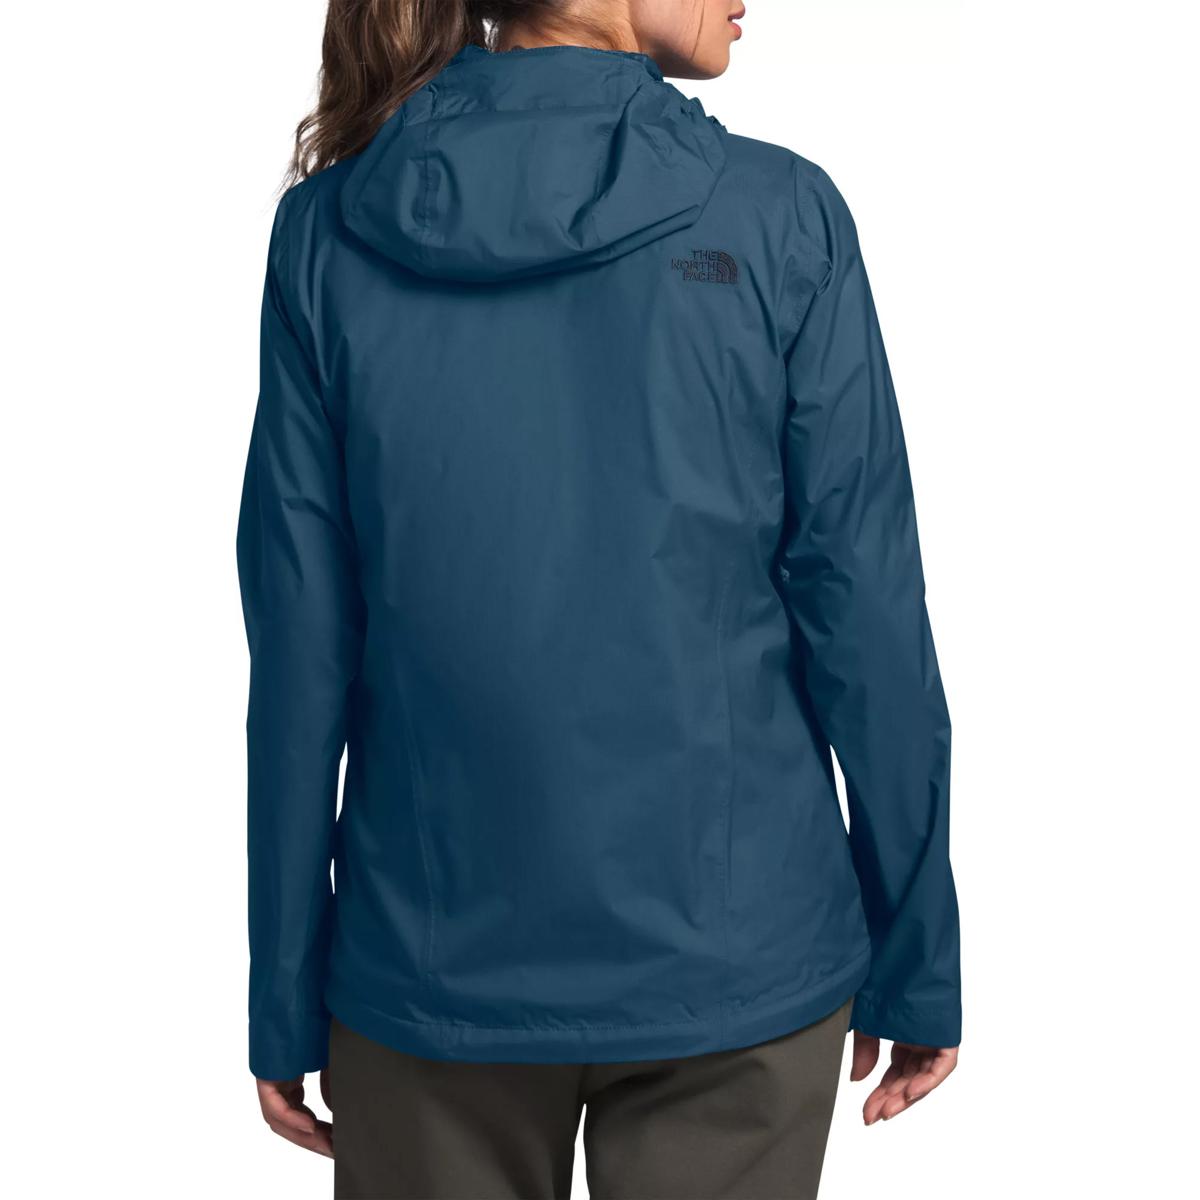 From dessert cold The North Face Womens VENTURE 2 JACKET BLUE - Paragon Sports